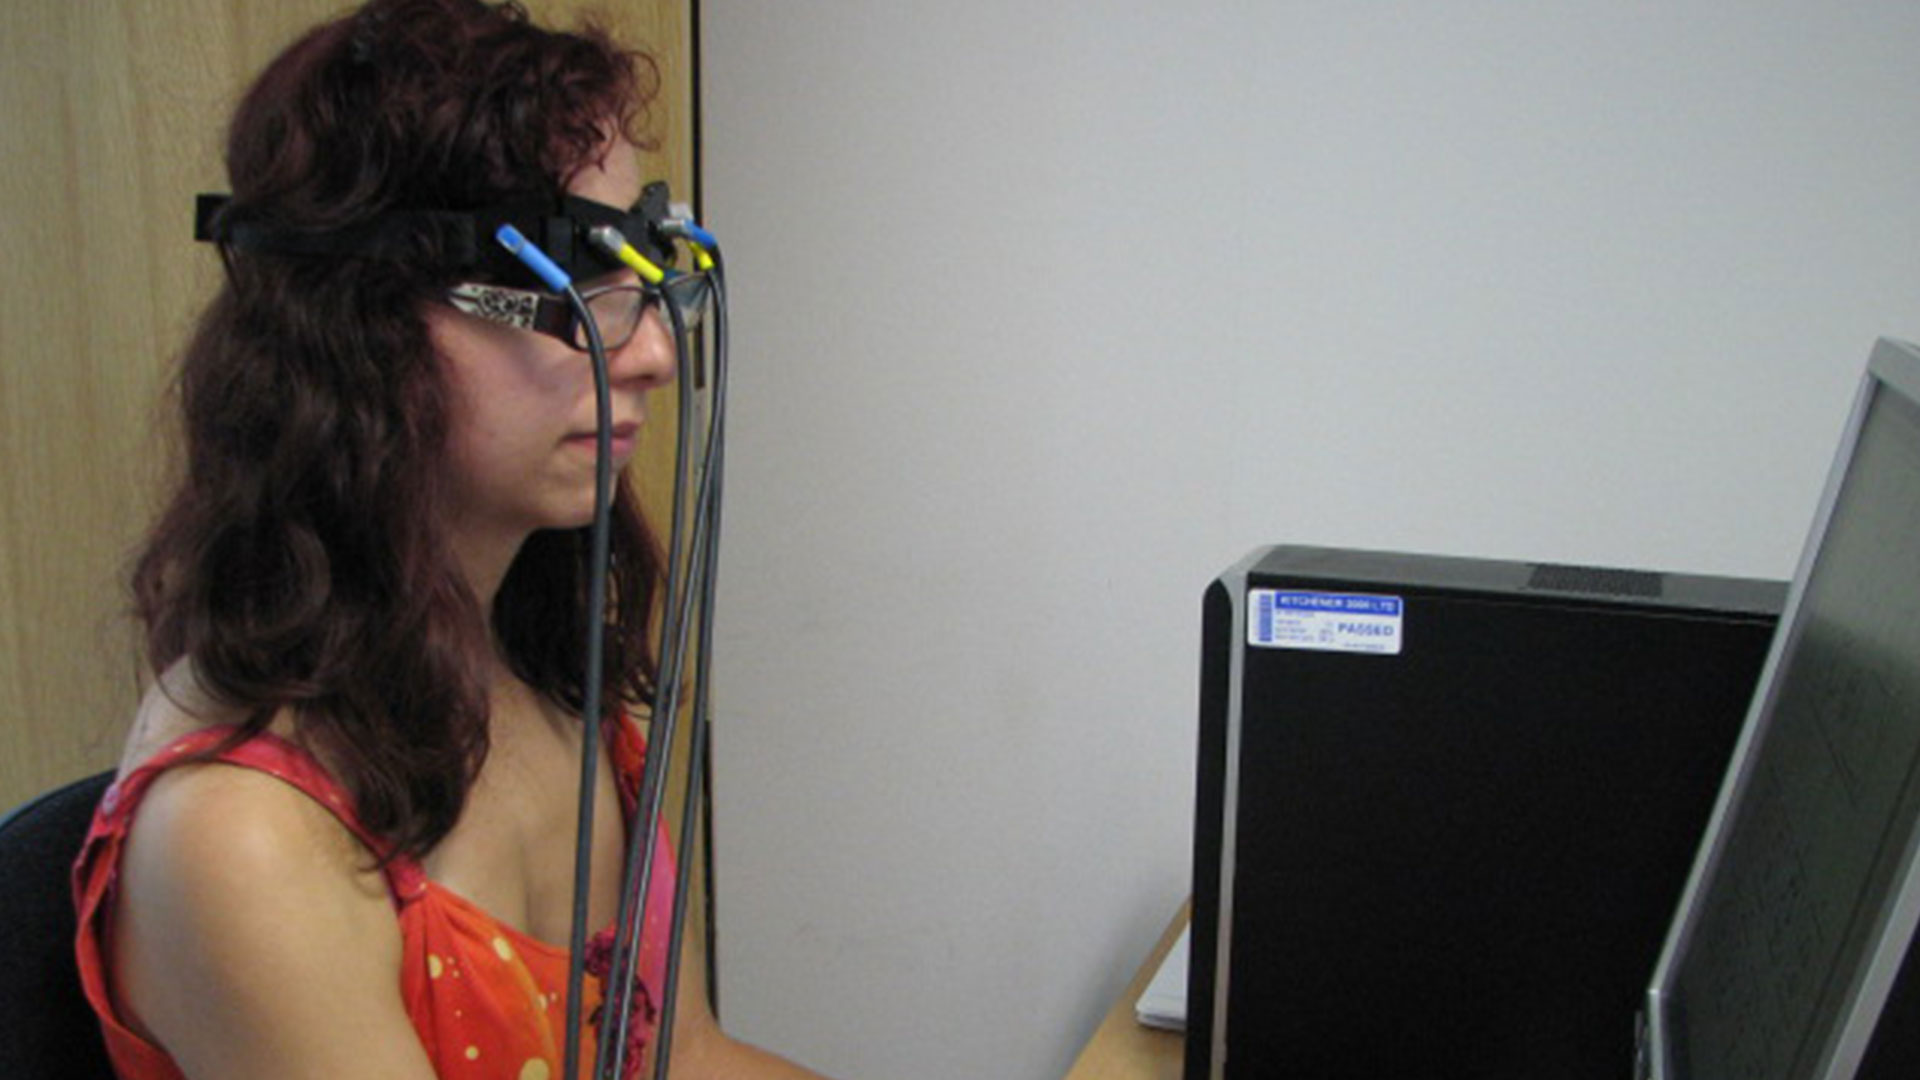 A research participant wearing the Near infra-red Spectroscopy (NIRS) equipment as part of Psychology research